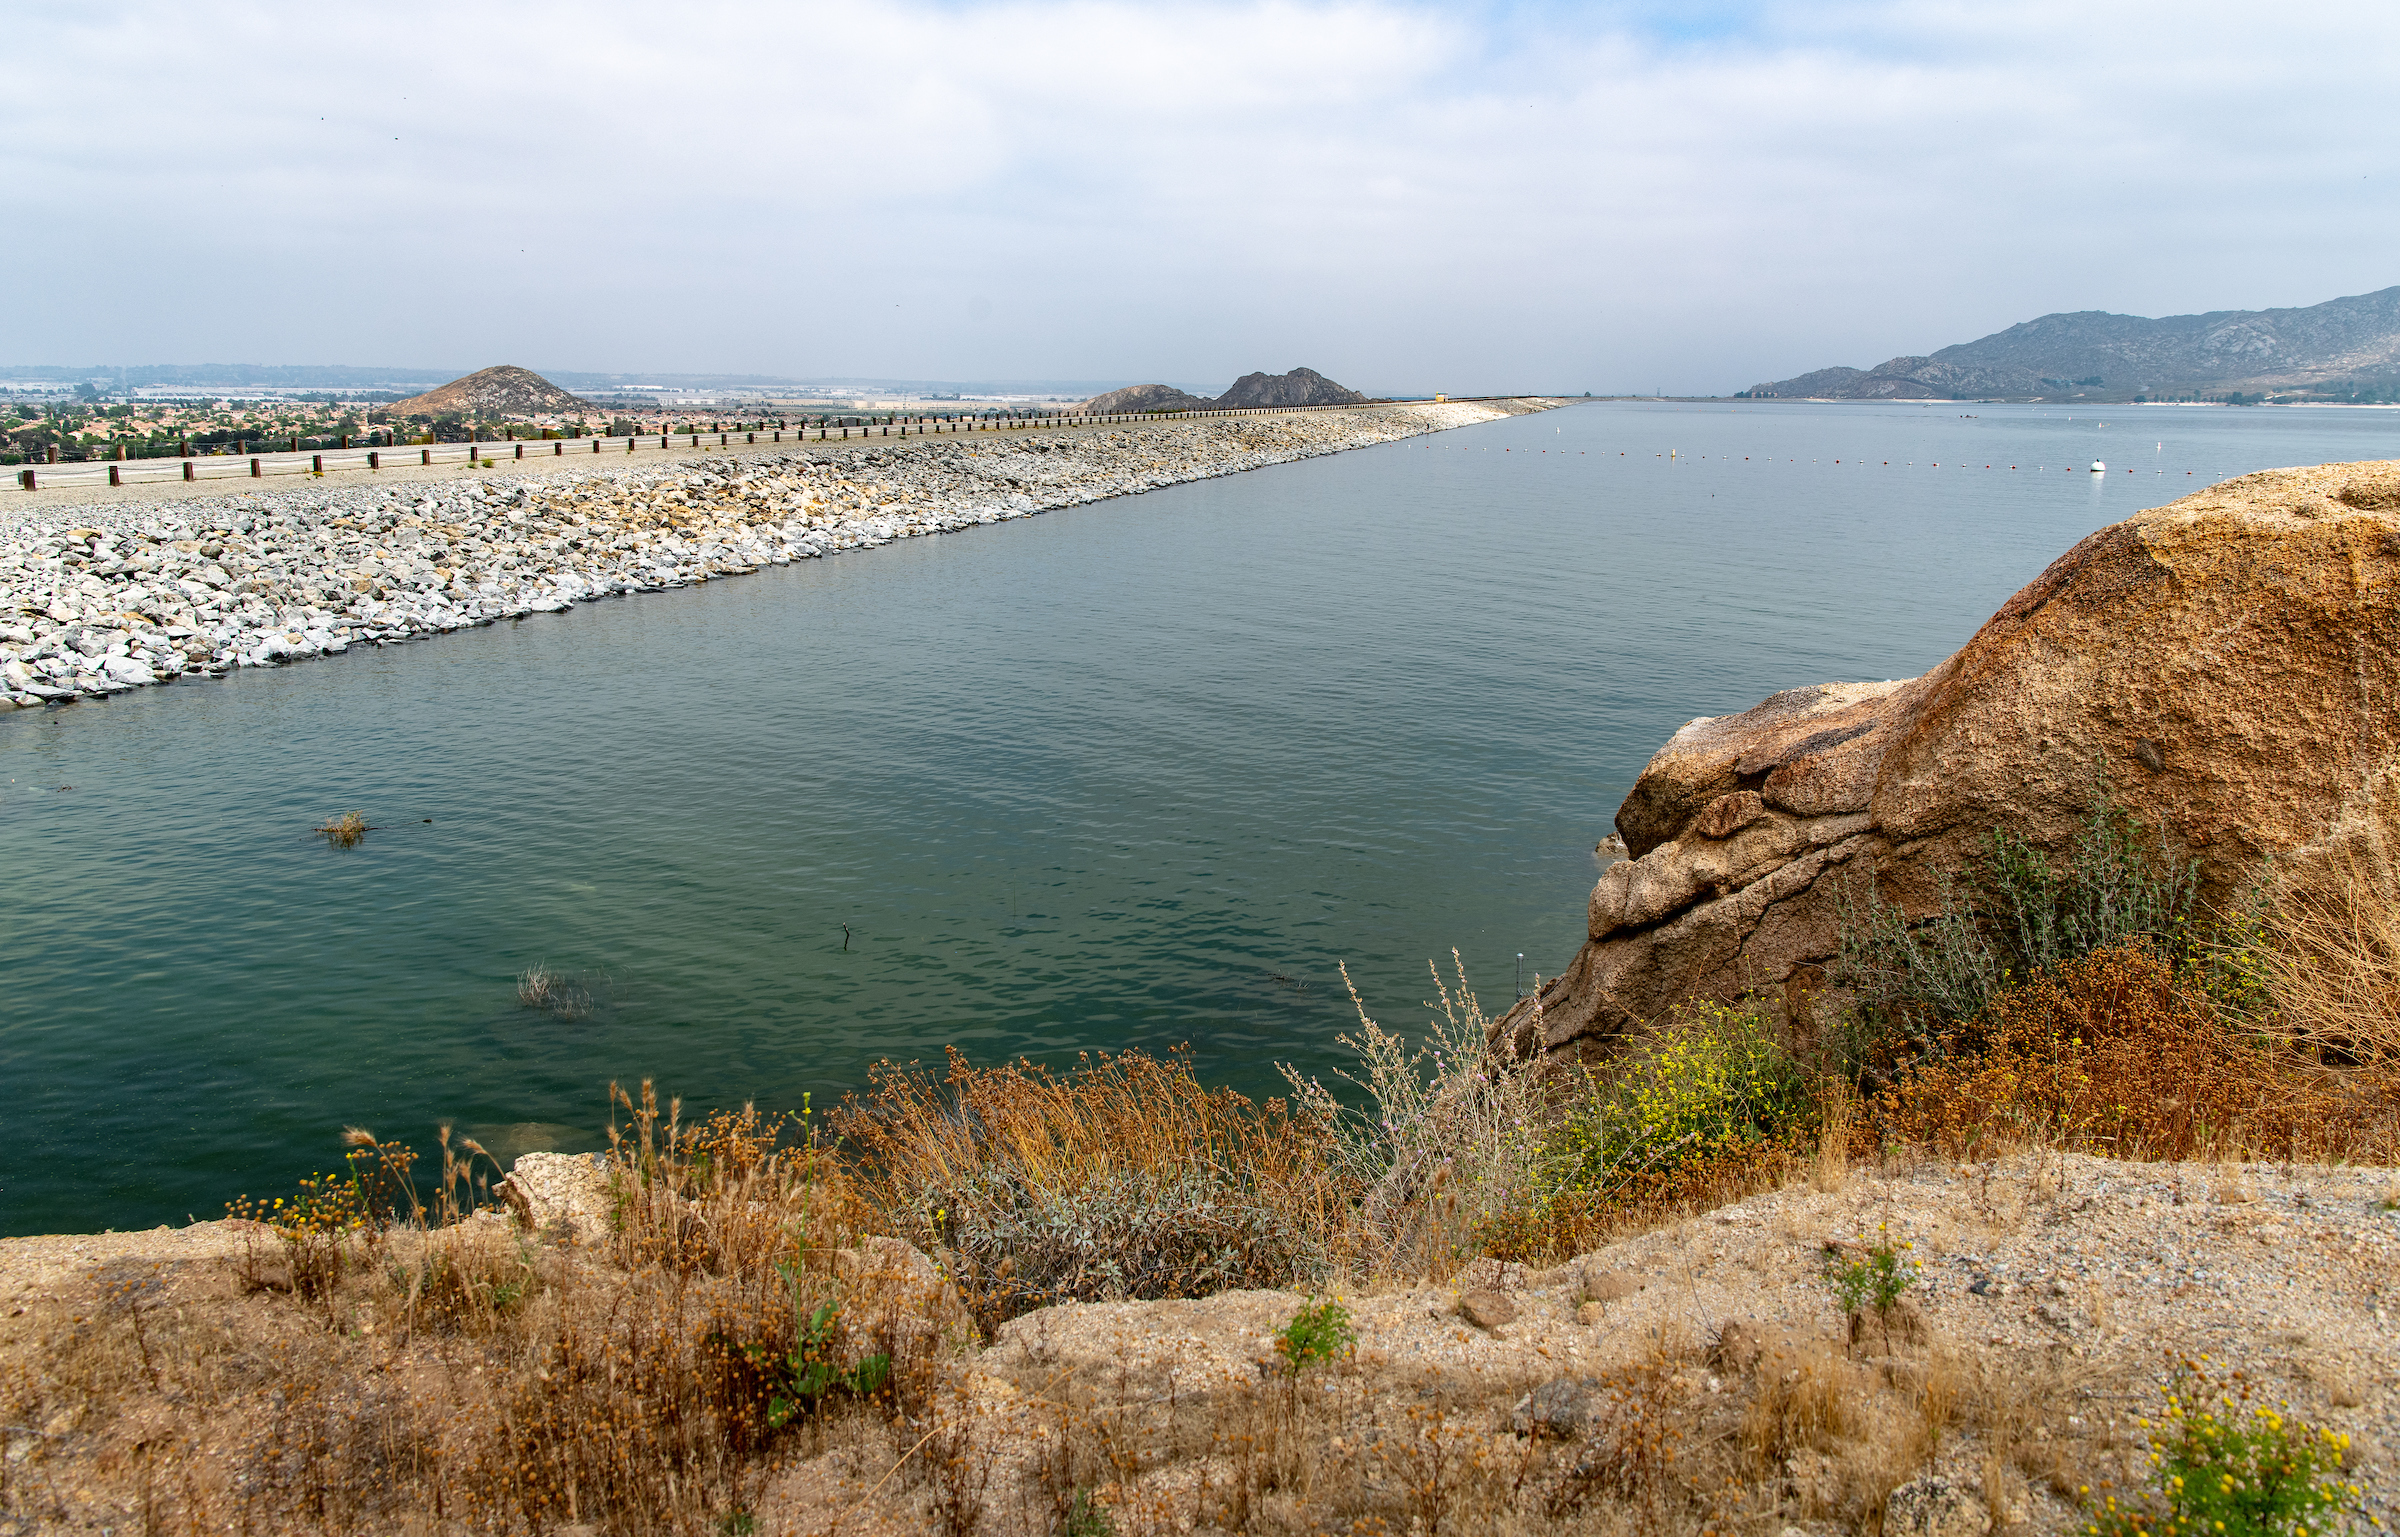 On June 1, 2019, the water level at Lake Perris was 1585.76 feet with a reservoir storage of 121,745 acre-feet. The artificial lake is the southern terminus of the California State Water Project, located in Riverside County. Photo taken June 1, 2019.